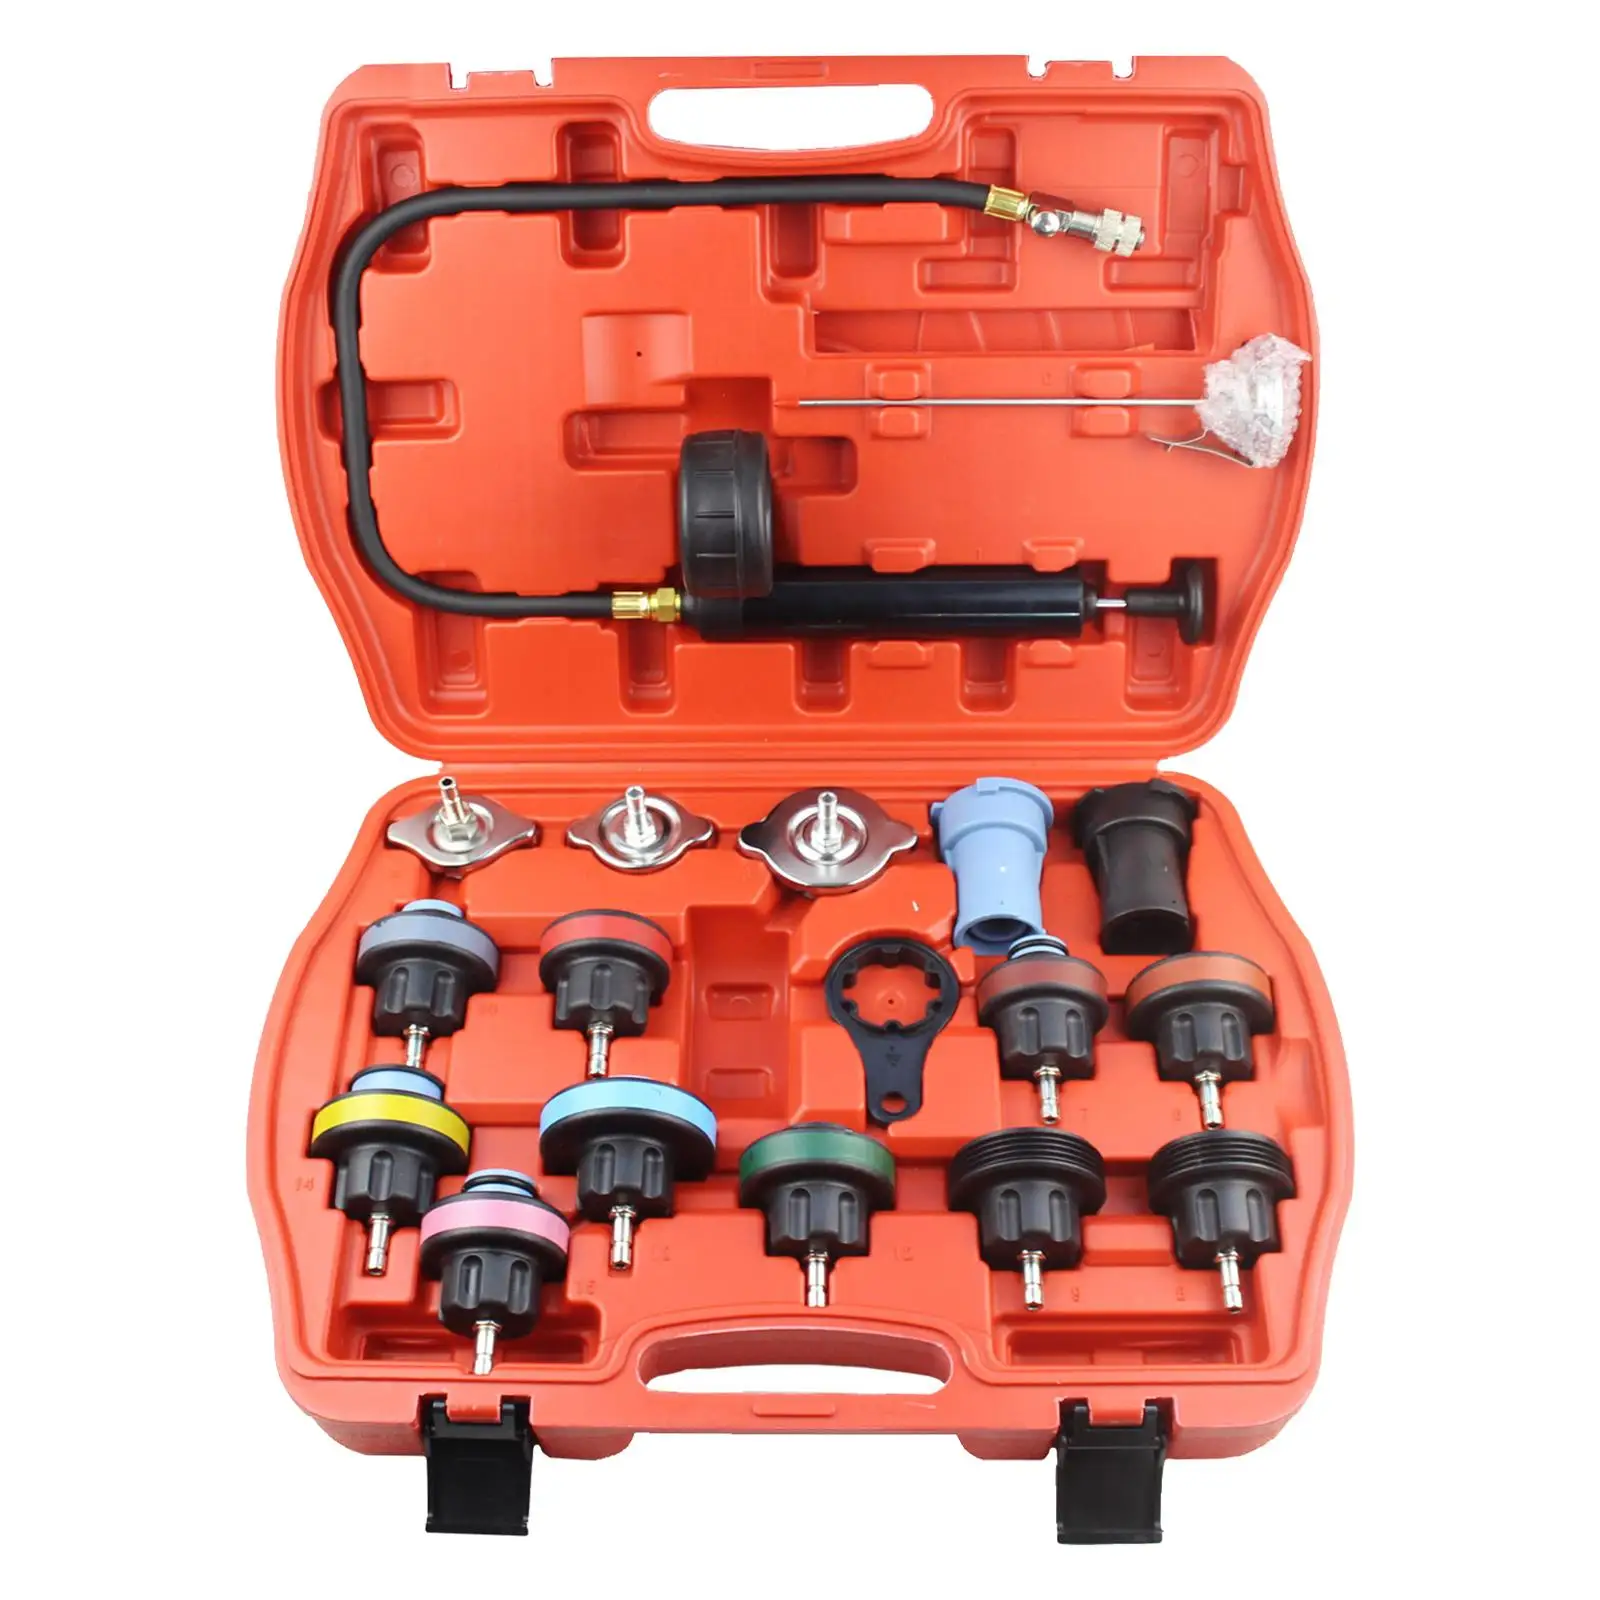 

18Pcs Pressure Tester Tool Kit Universal for Most Car Vehicle Parts